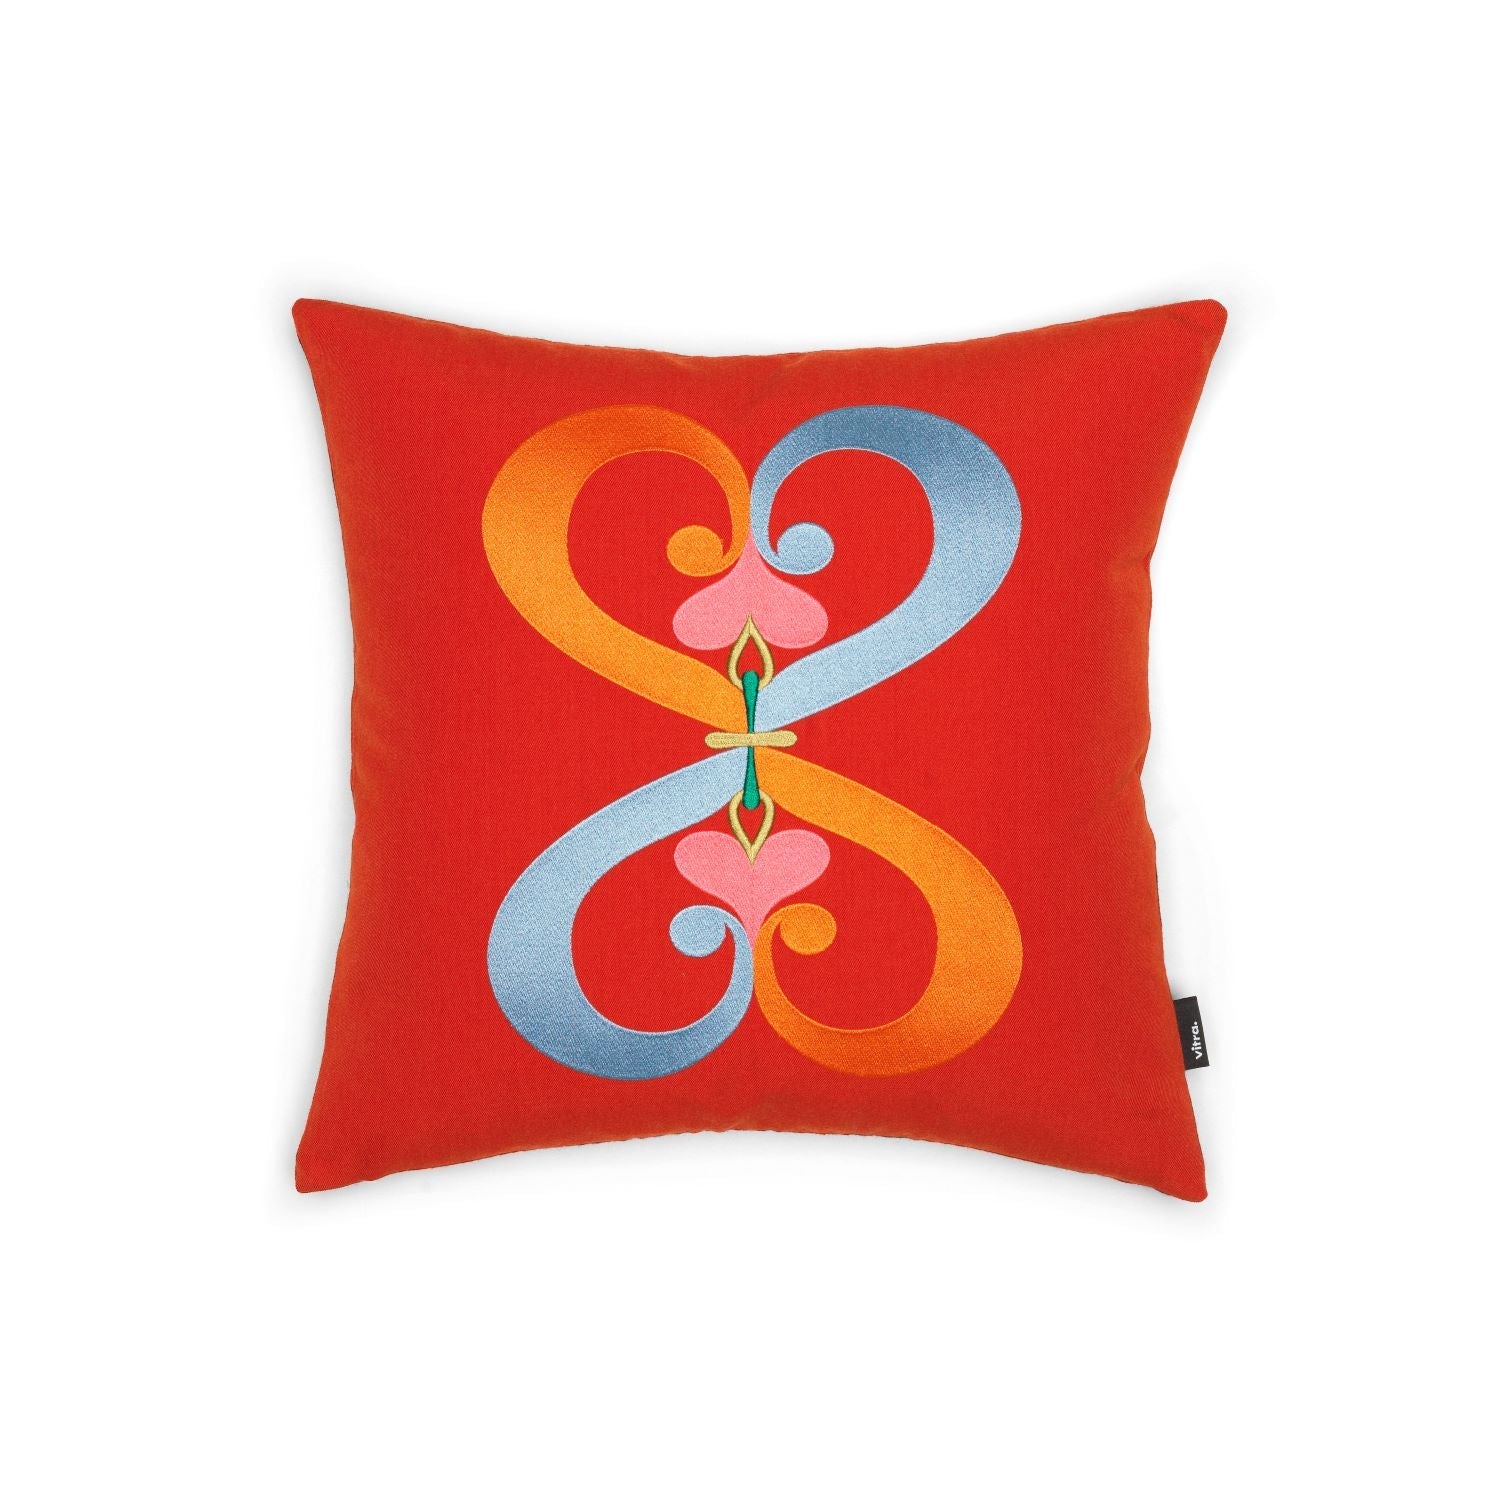 Embroidered Pillow, Double Heart rot - Vitra Design Museum Shop